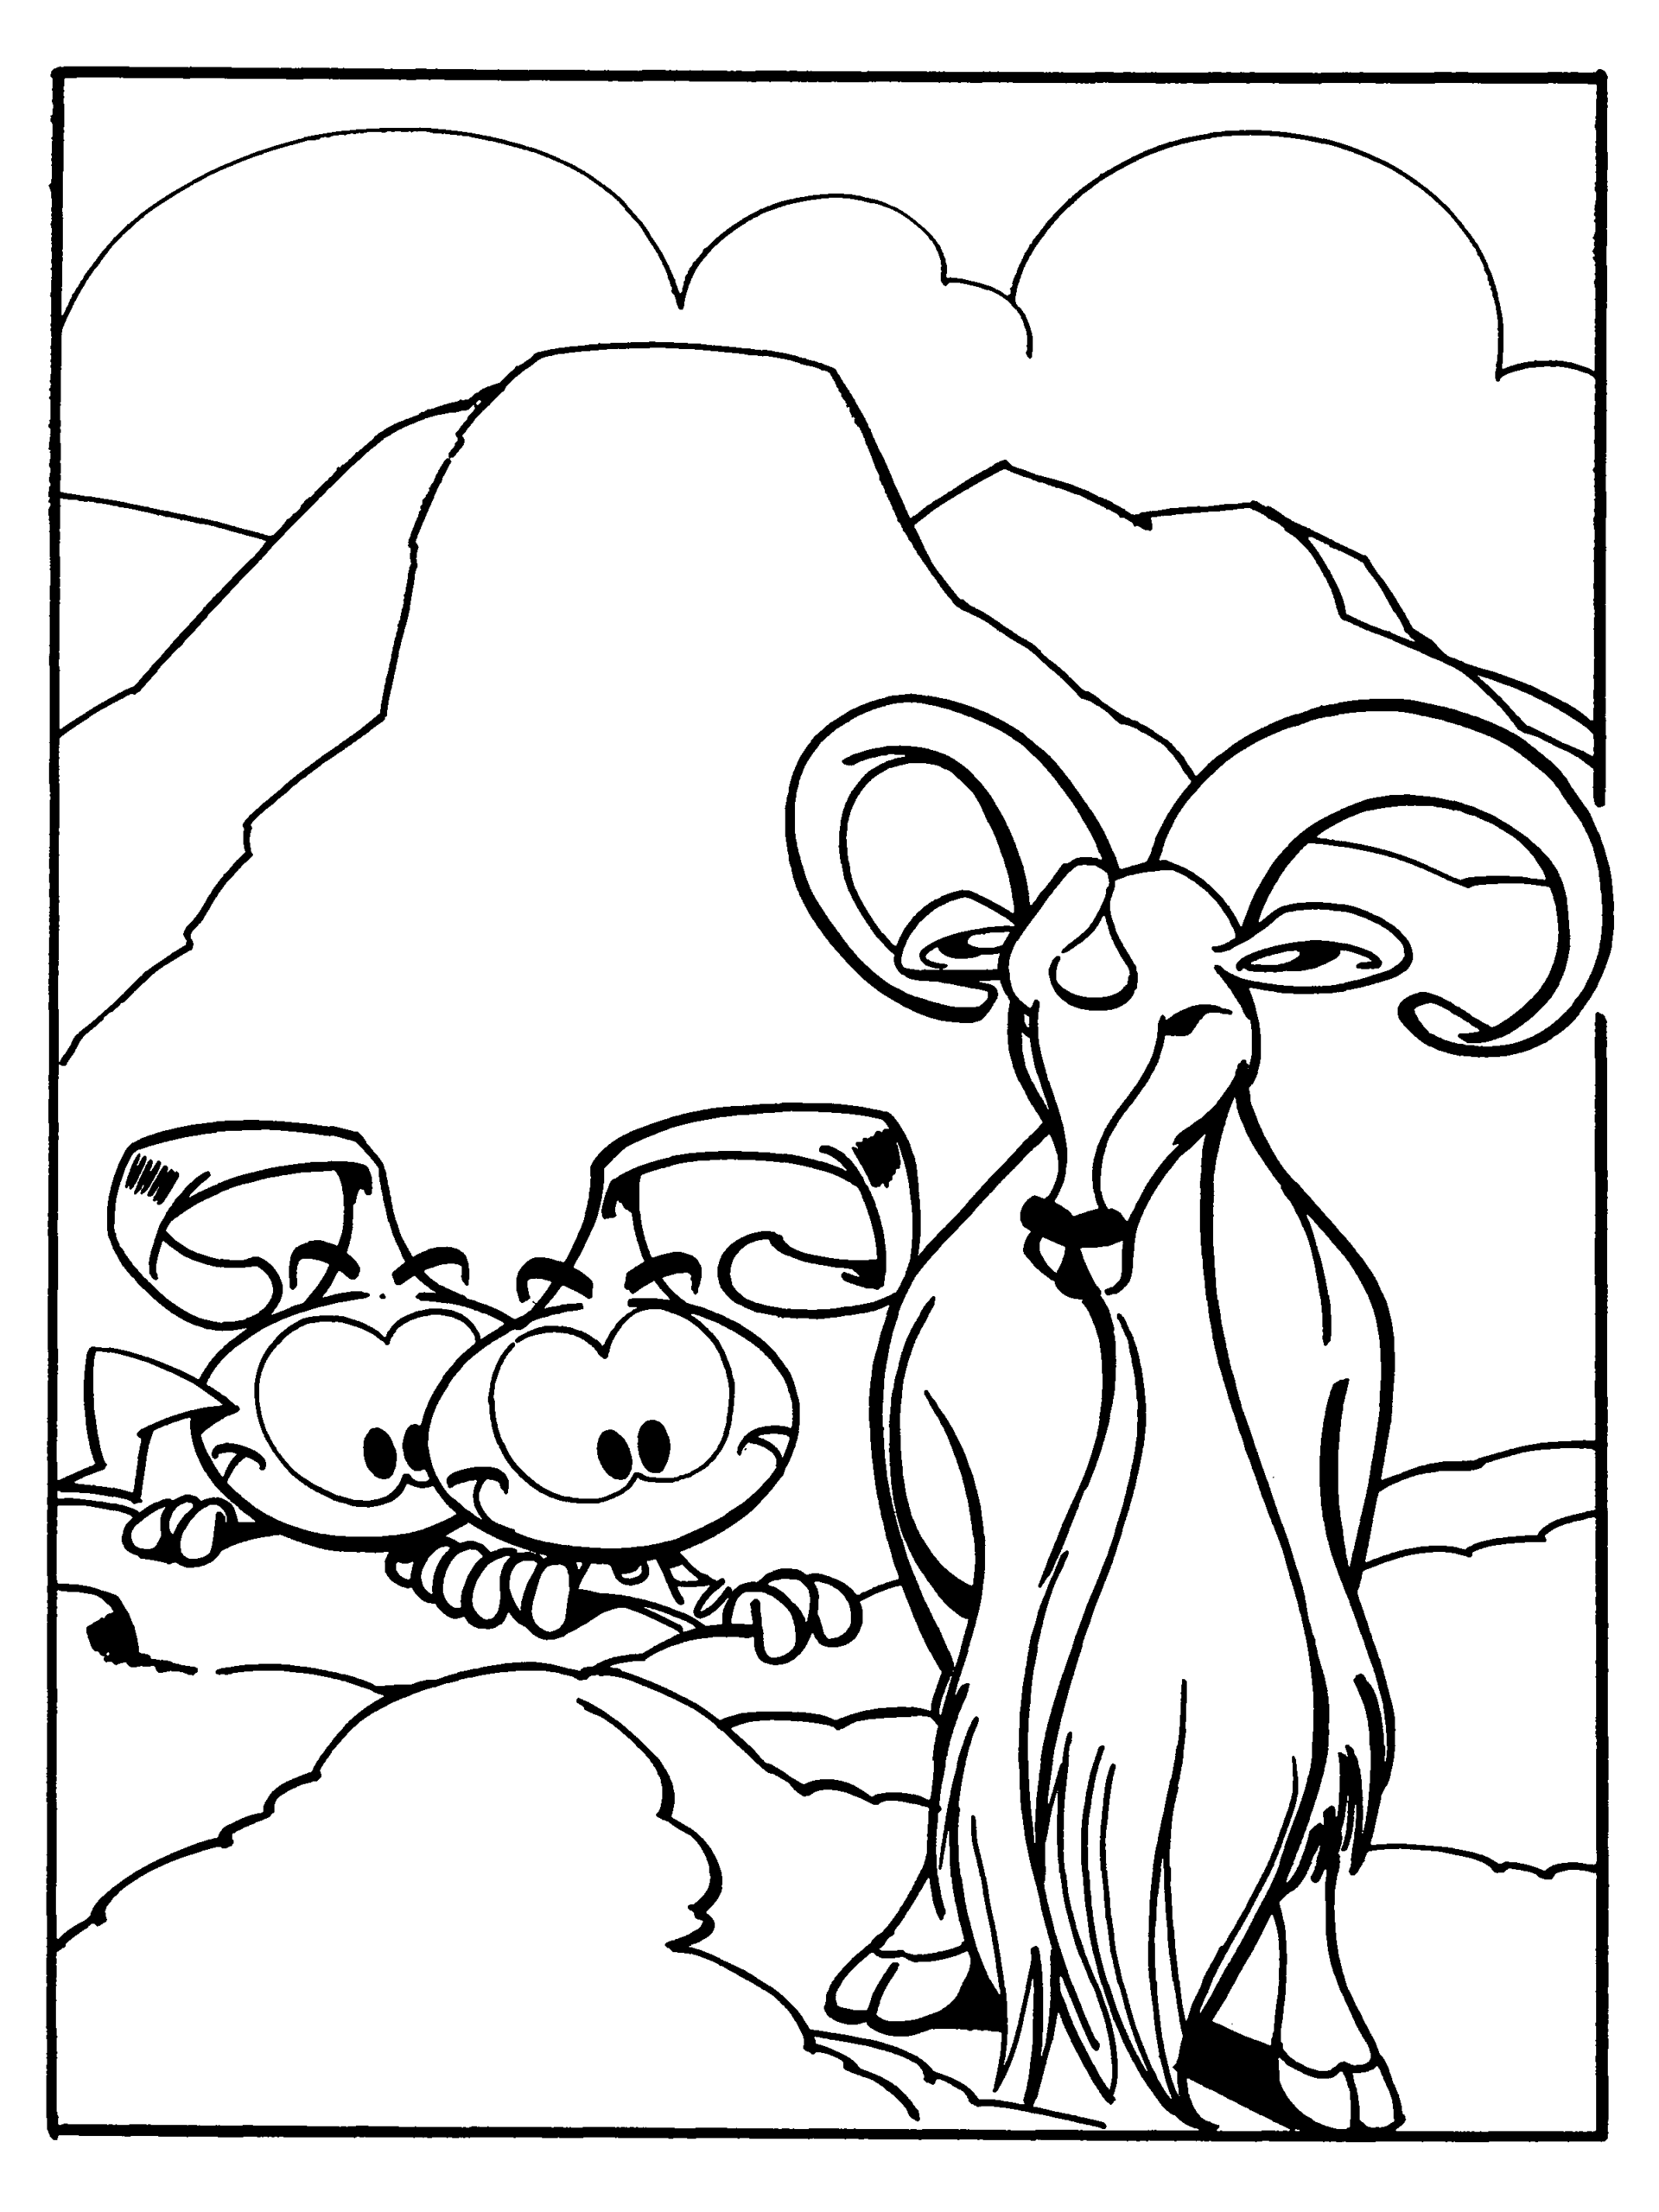 Snorks Coloring Pages TV Film snorks 6 Printable 2020 07666 Coloring4free